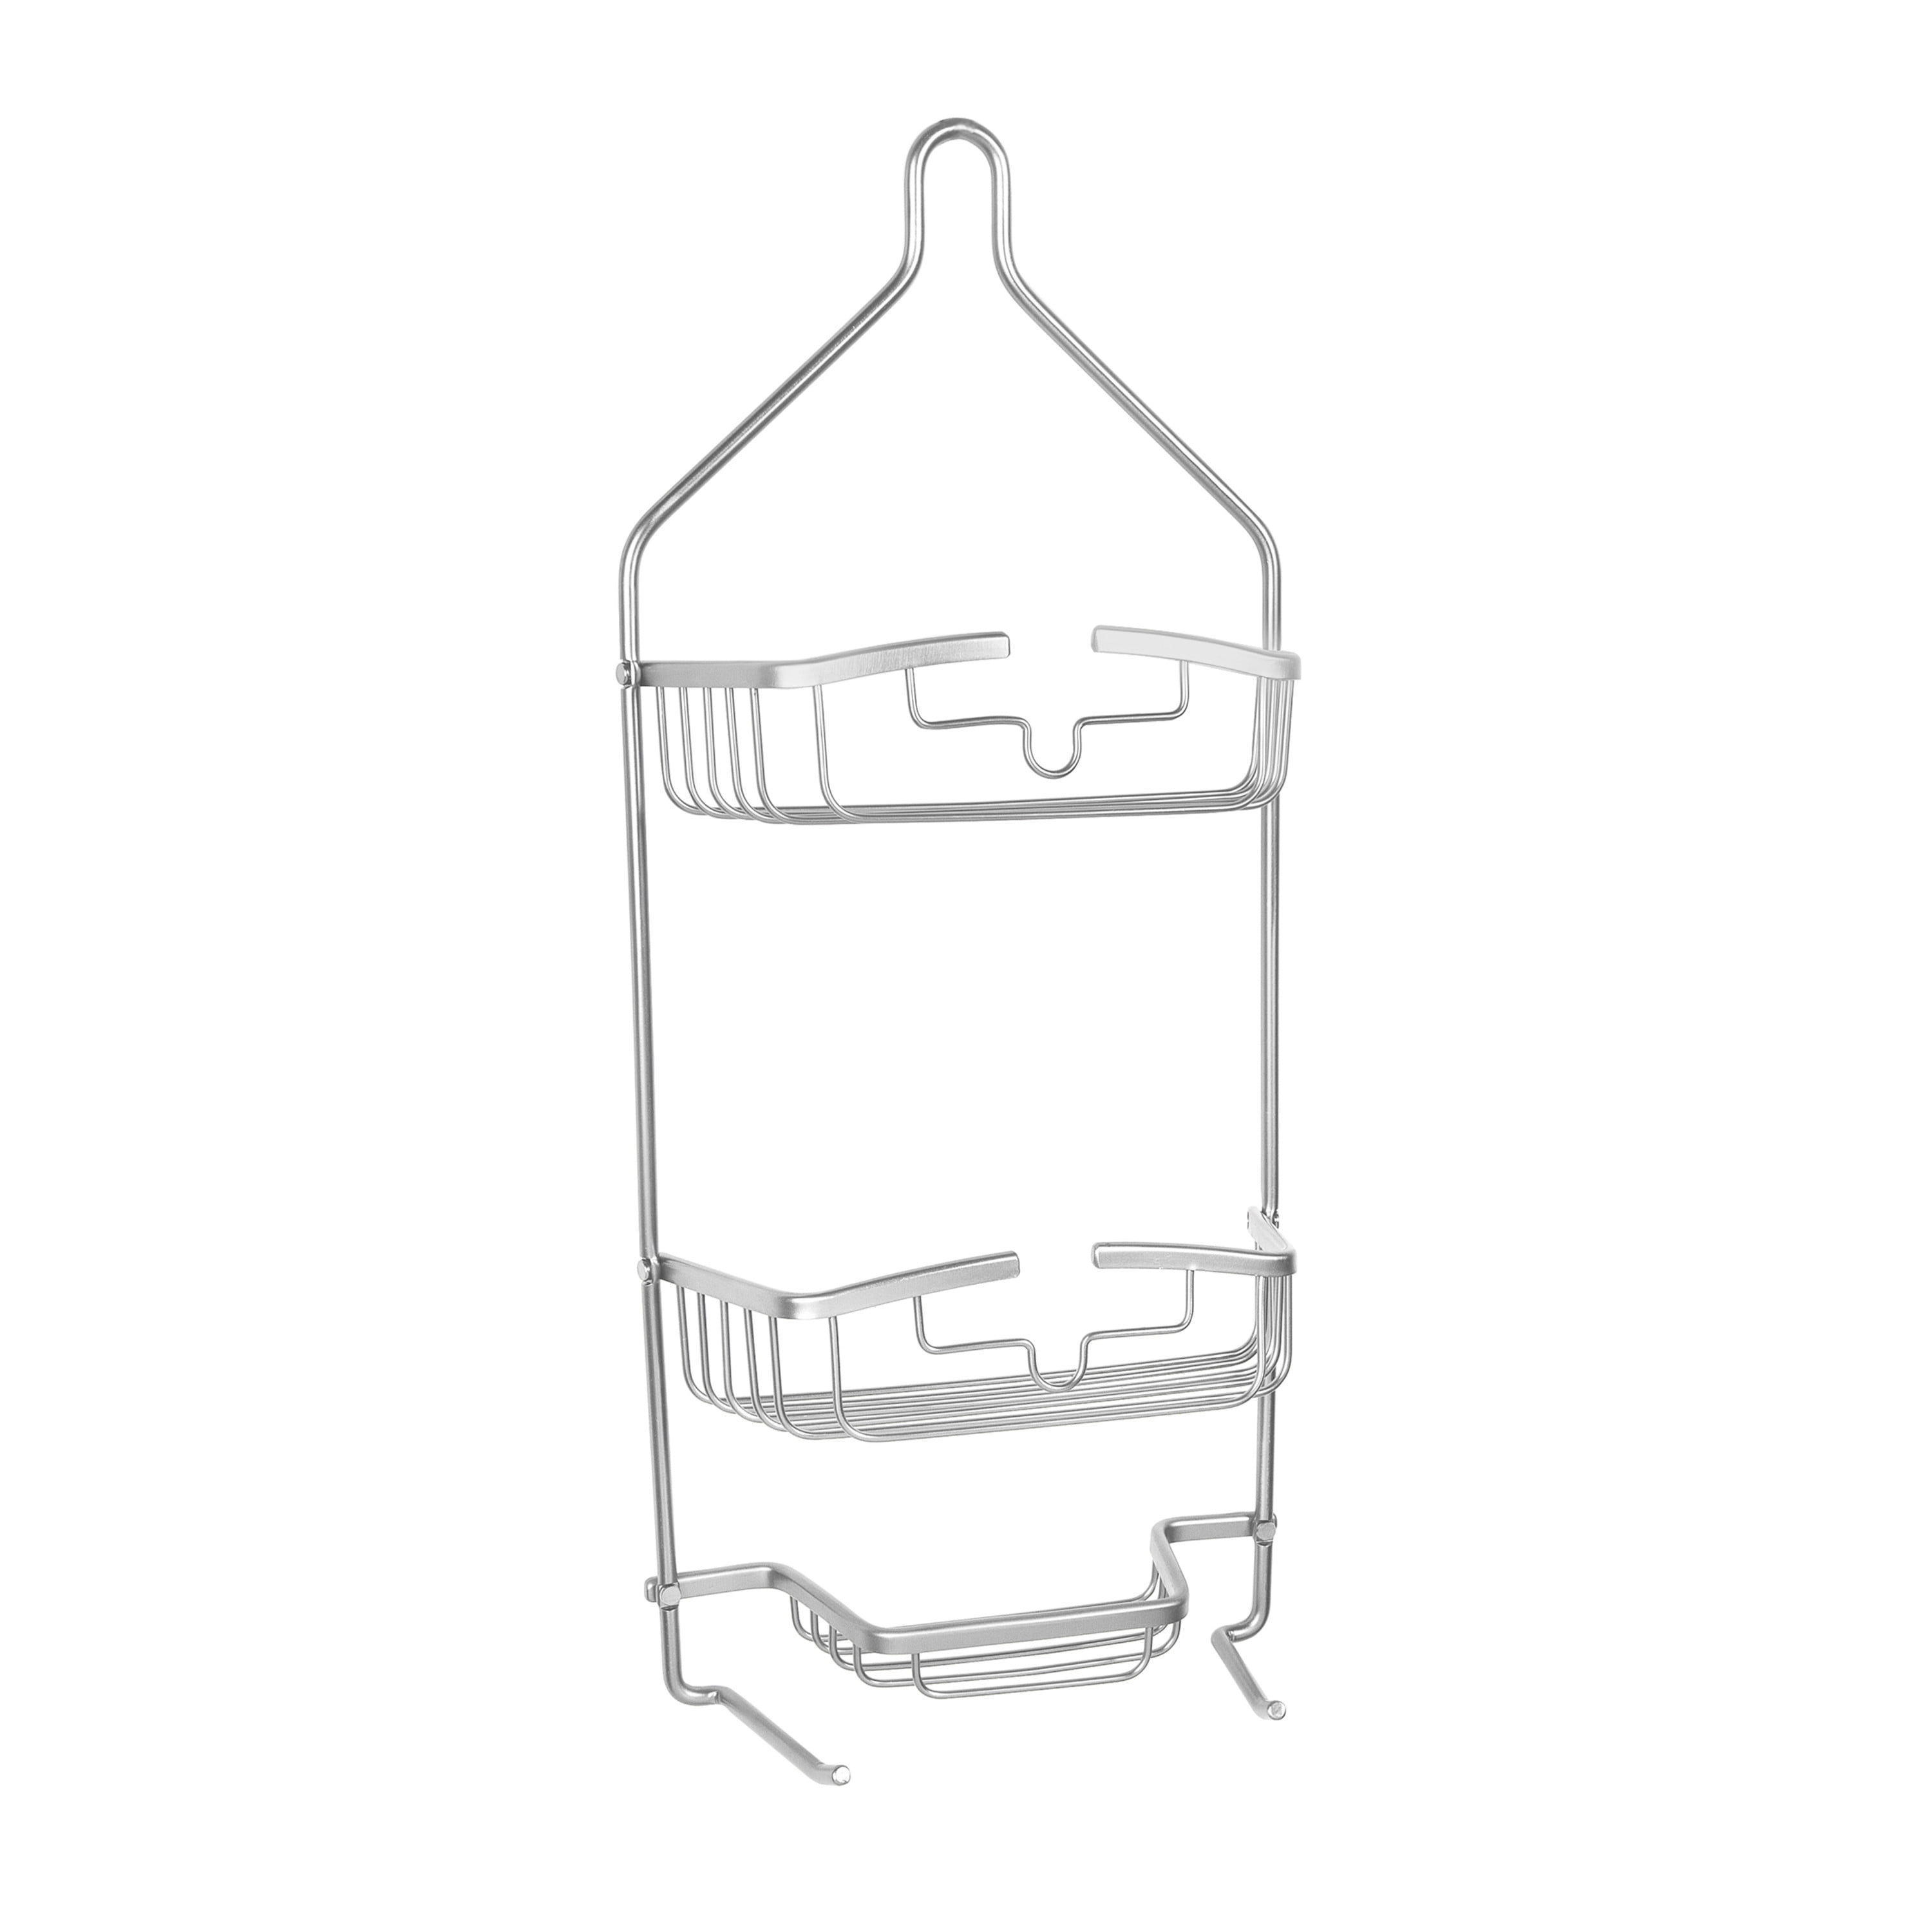 2-Tier Hanging Shower Caddy, Rustproof White - All Products